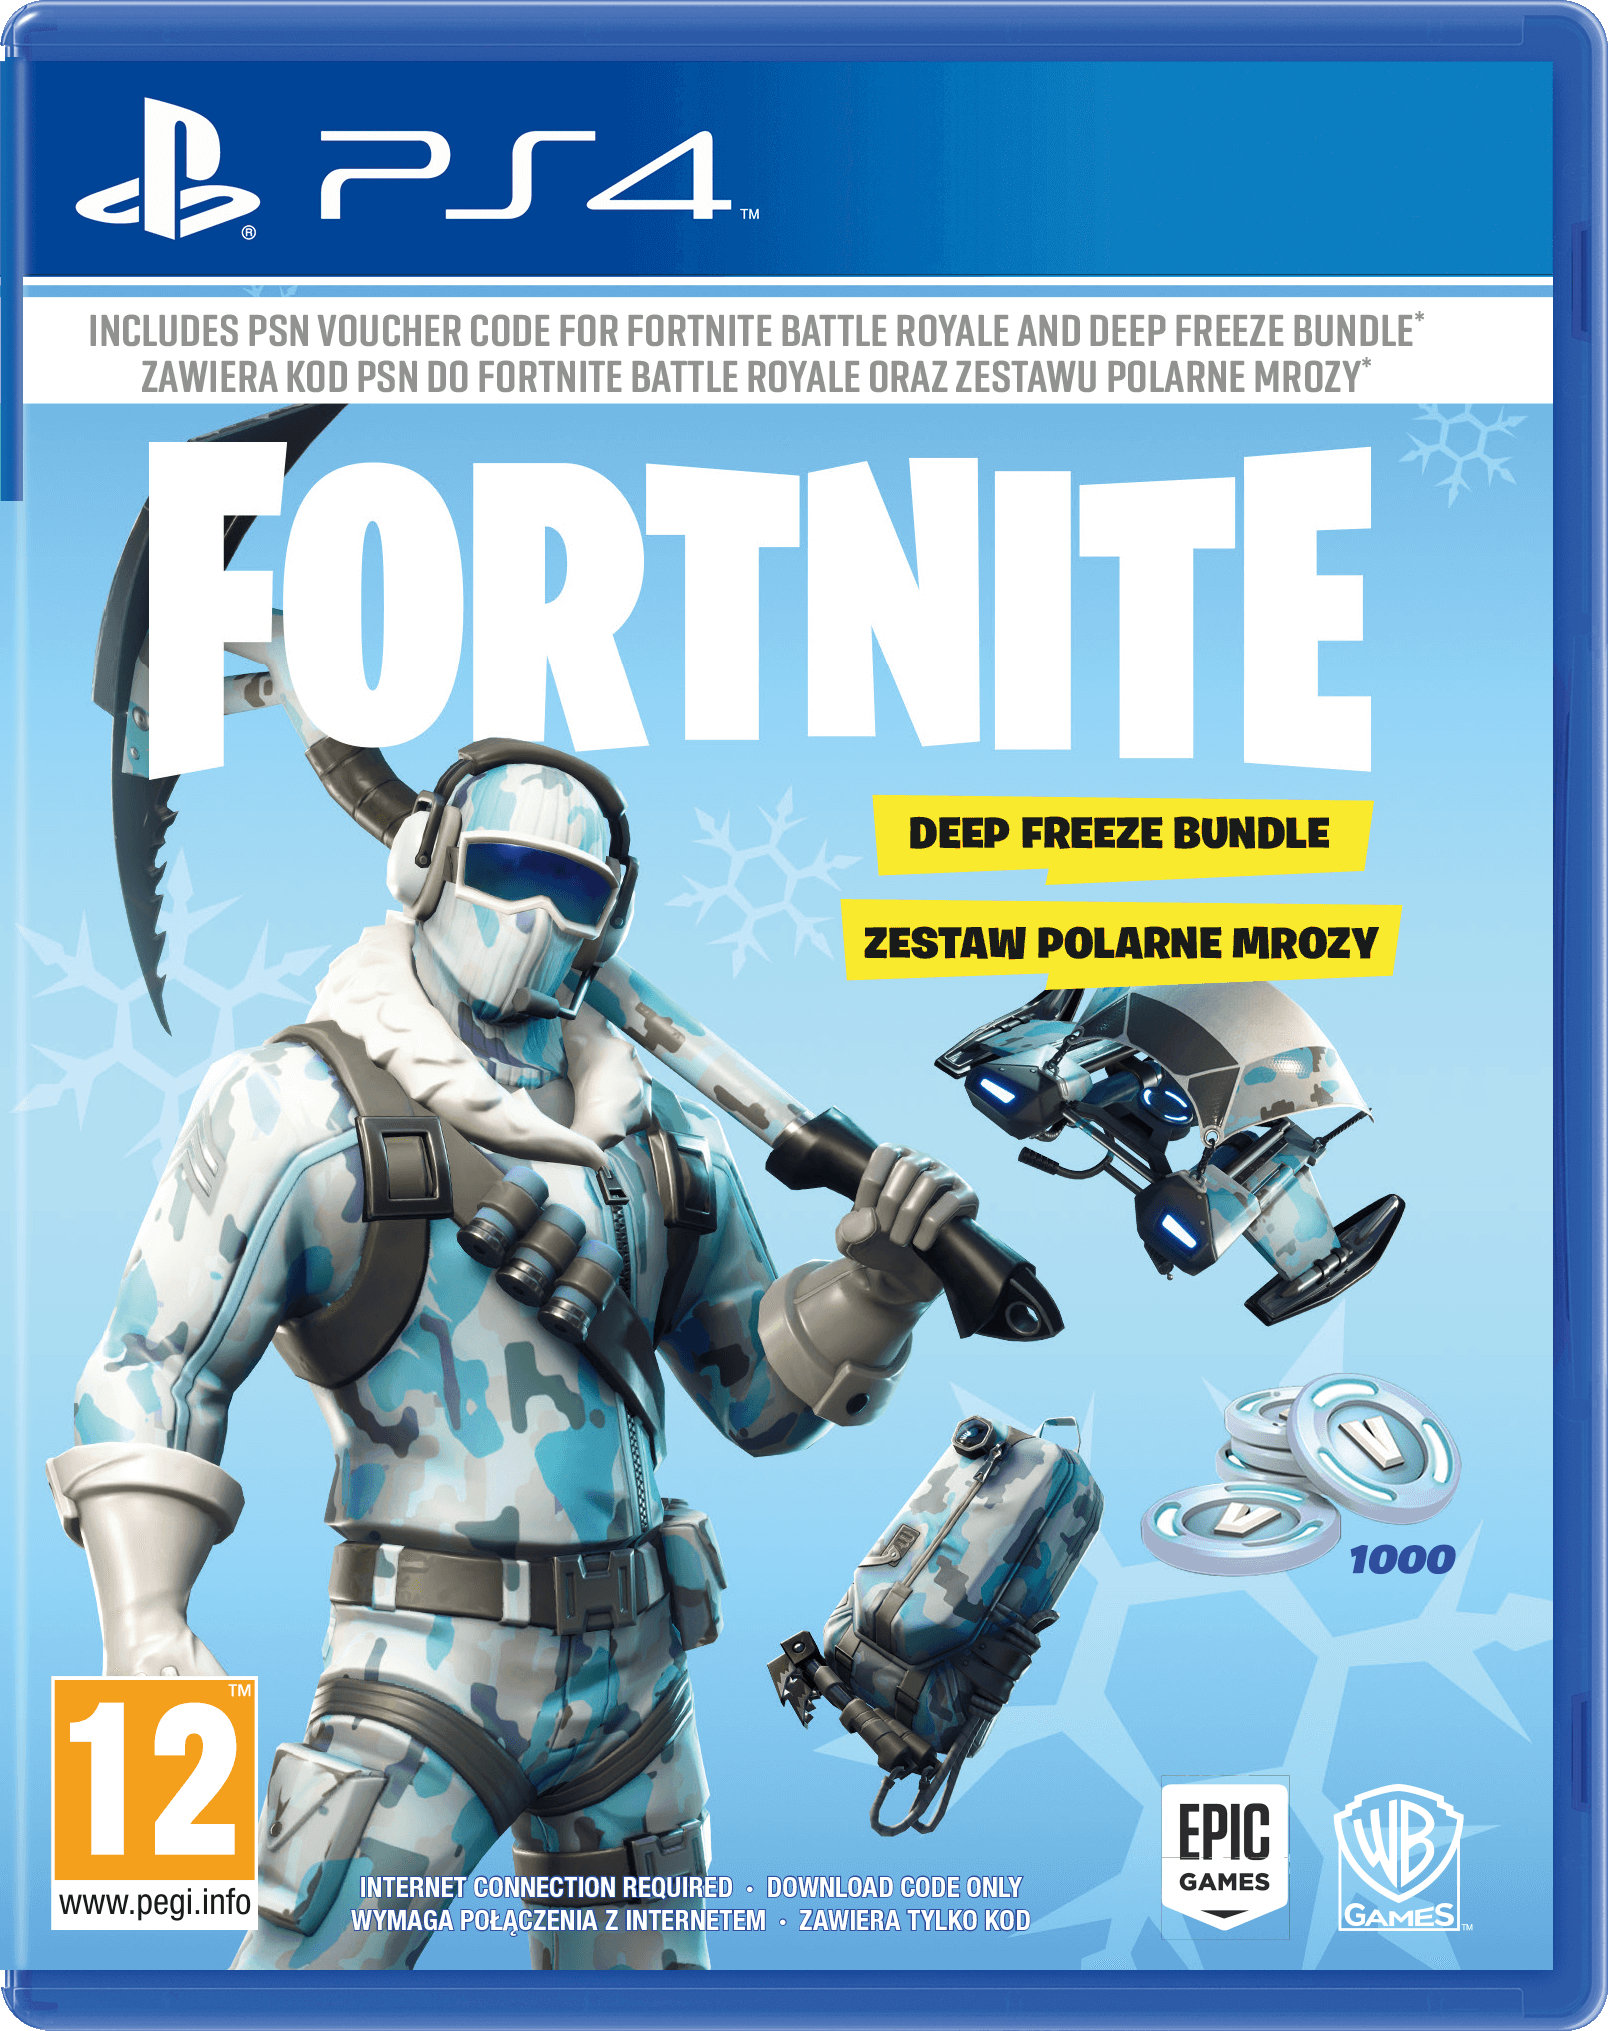 56 HQ Pictures Fortnite Dev In Ps4 / Updated! How To Get Fortnite.dev